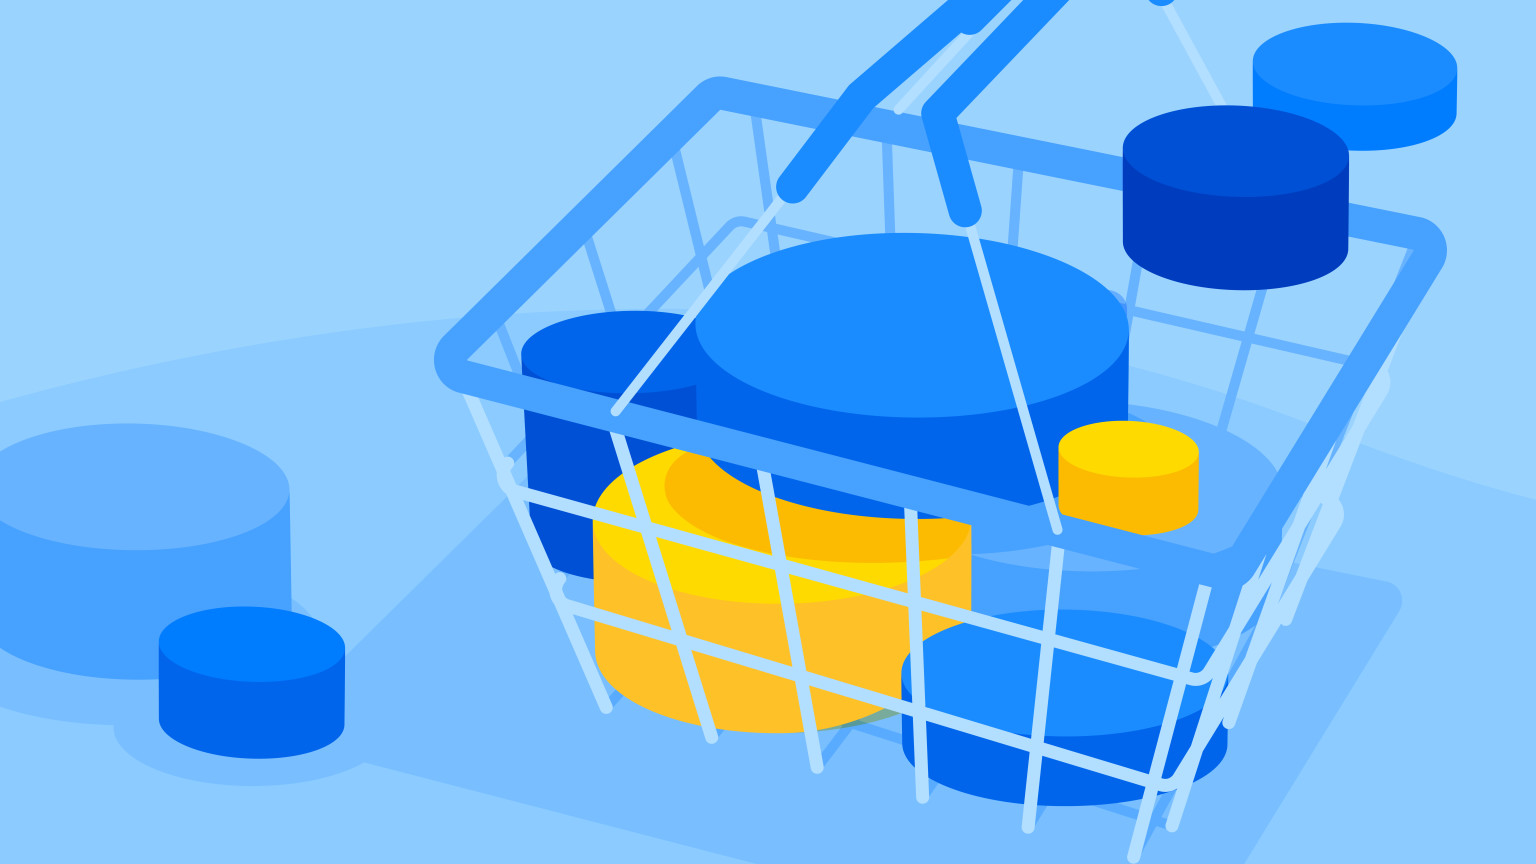 An illustration of a shopping basket filled with absract shapes representing how microservices architecture unites content and ecommerce